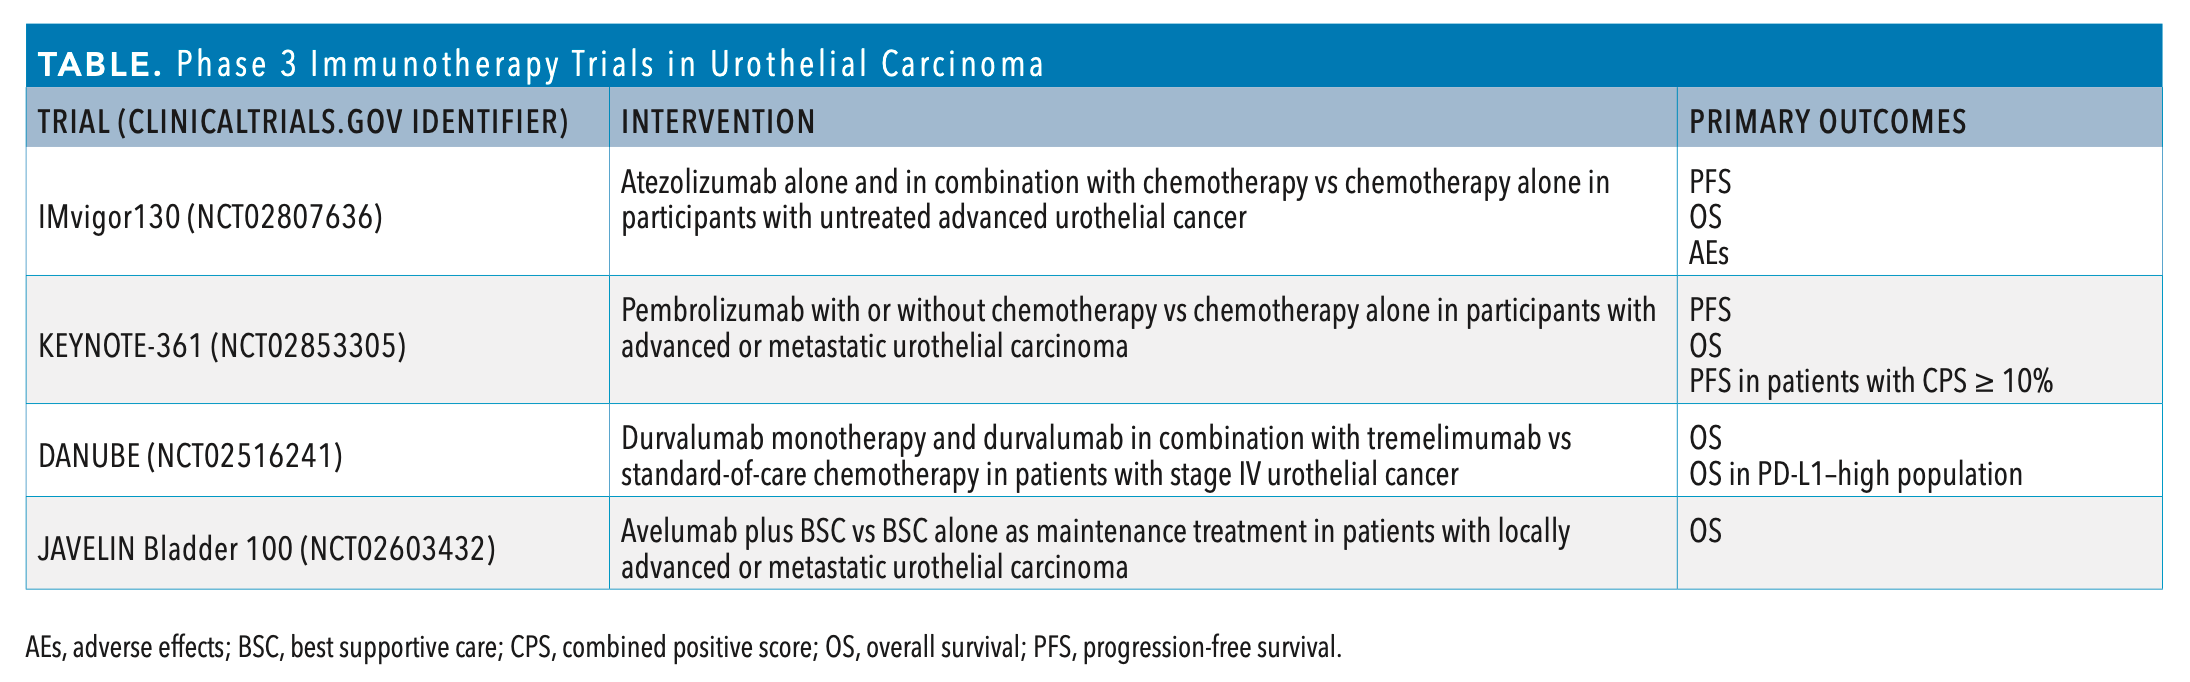 Phase 3 Immunotherapy Trials in Urothelial Carcinoma